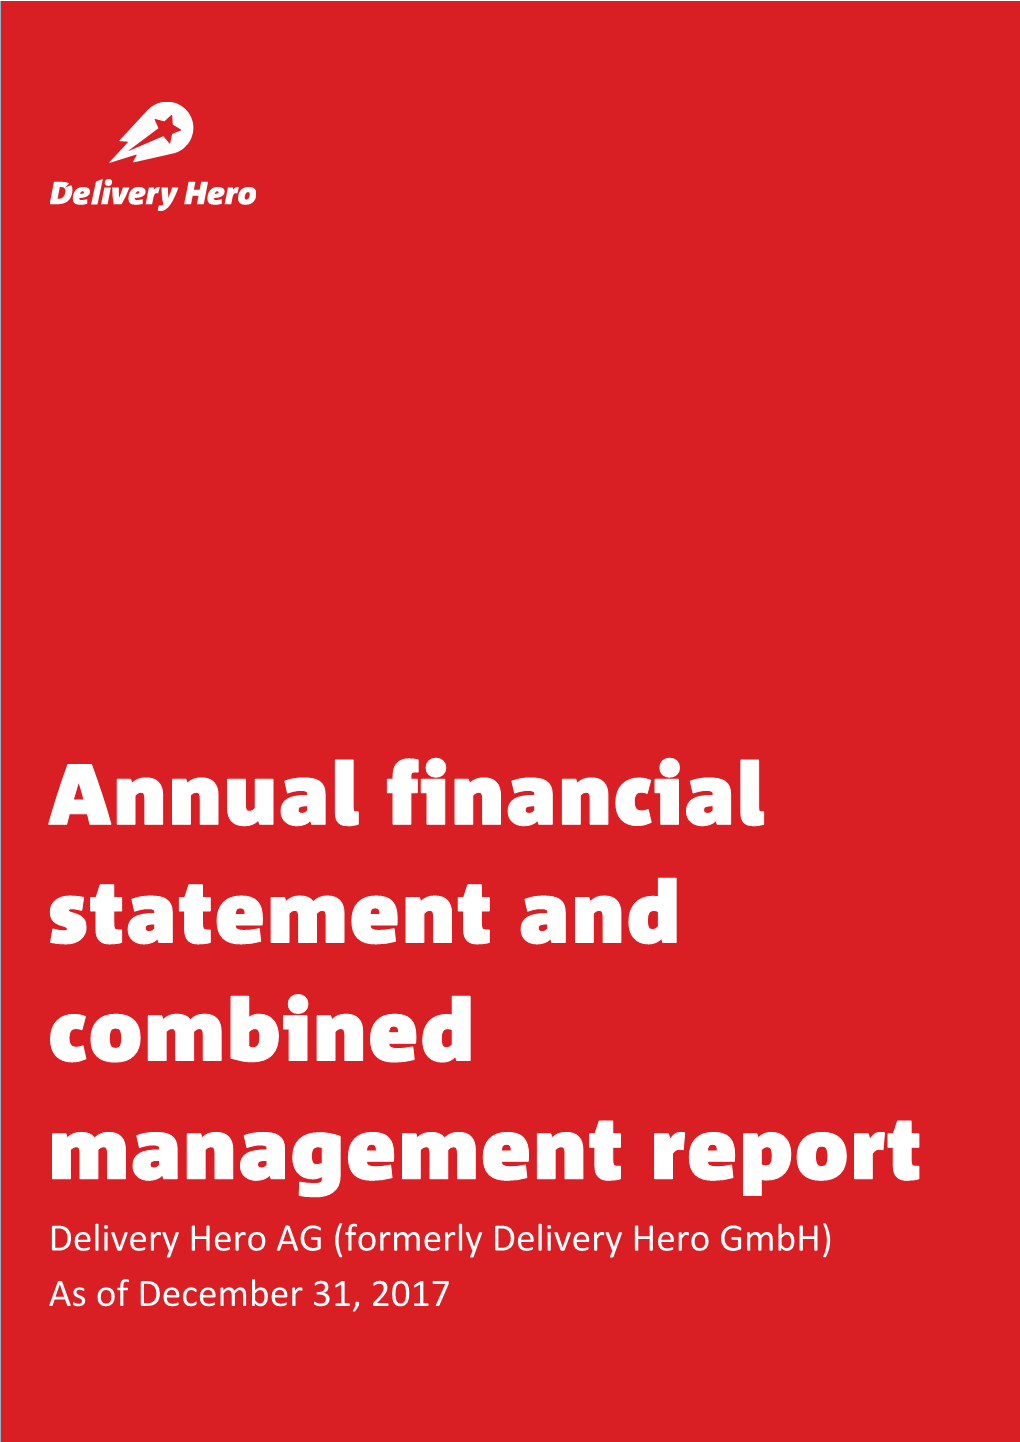 Annual Financial Statement and Combined Management Report Delivery Hero AG (Formerly Delivery Hero Gmbh) As of December 31, 2017